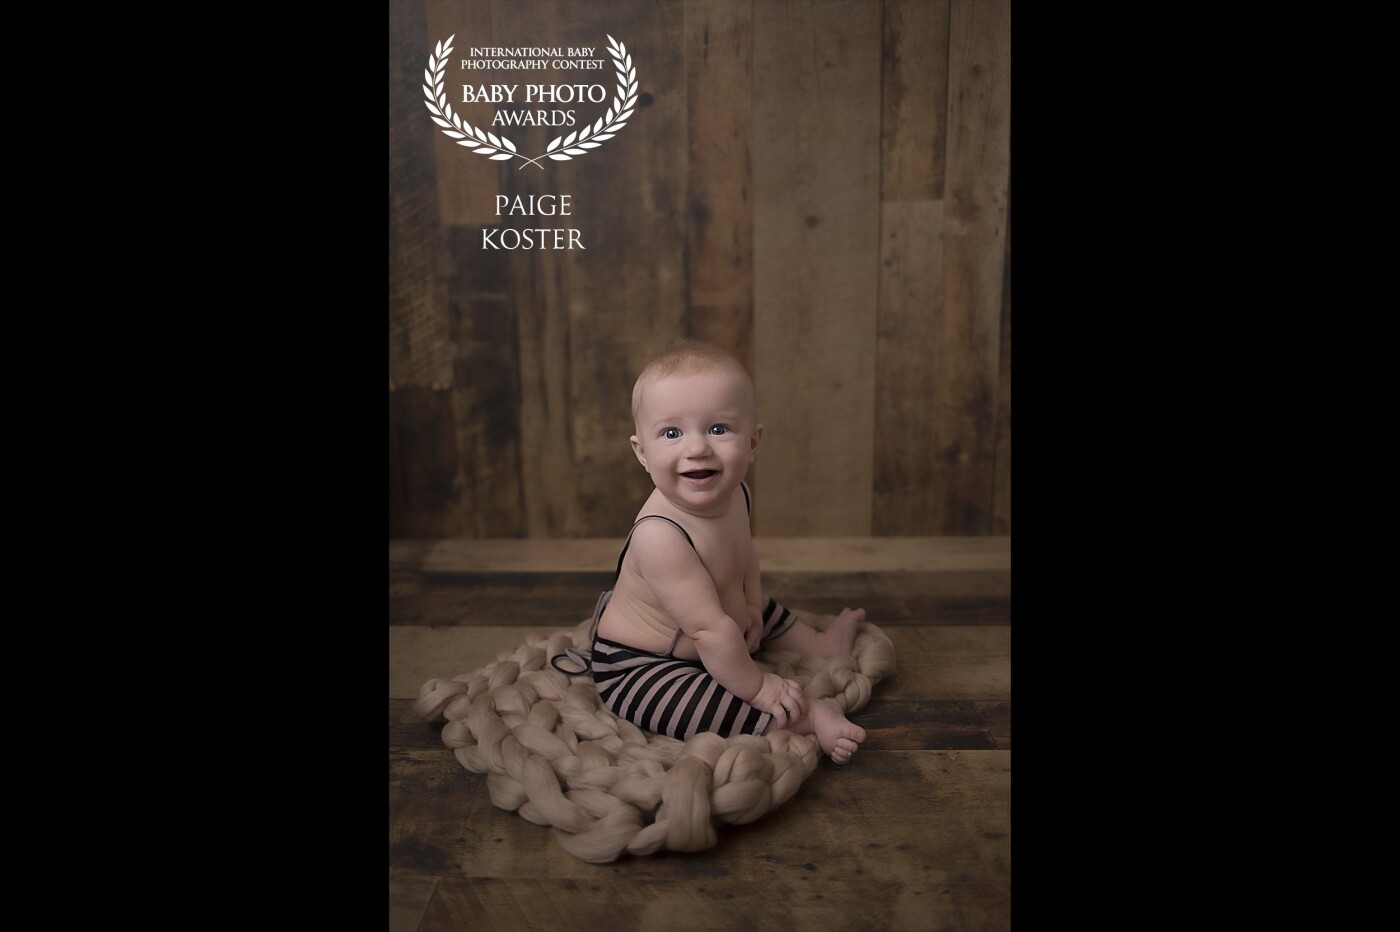 This particular image holds a very close place in my heart as it's an image of my son, Tanner. He's a very happy baby, which made taking his photograph a breeze. 